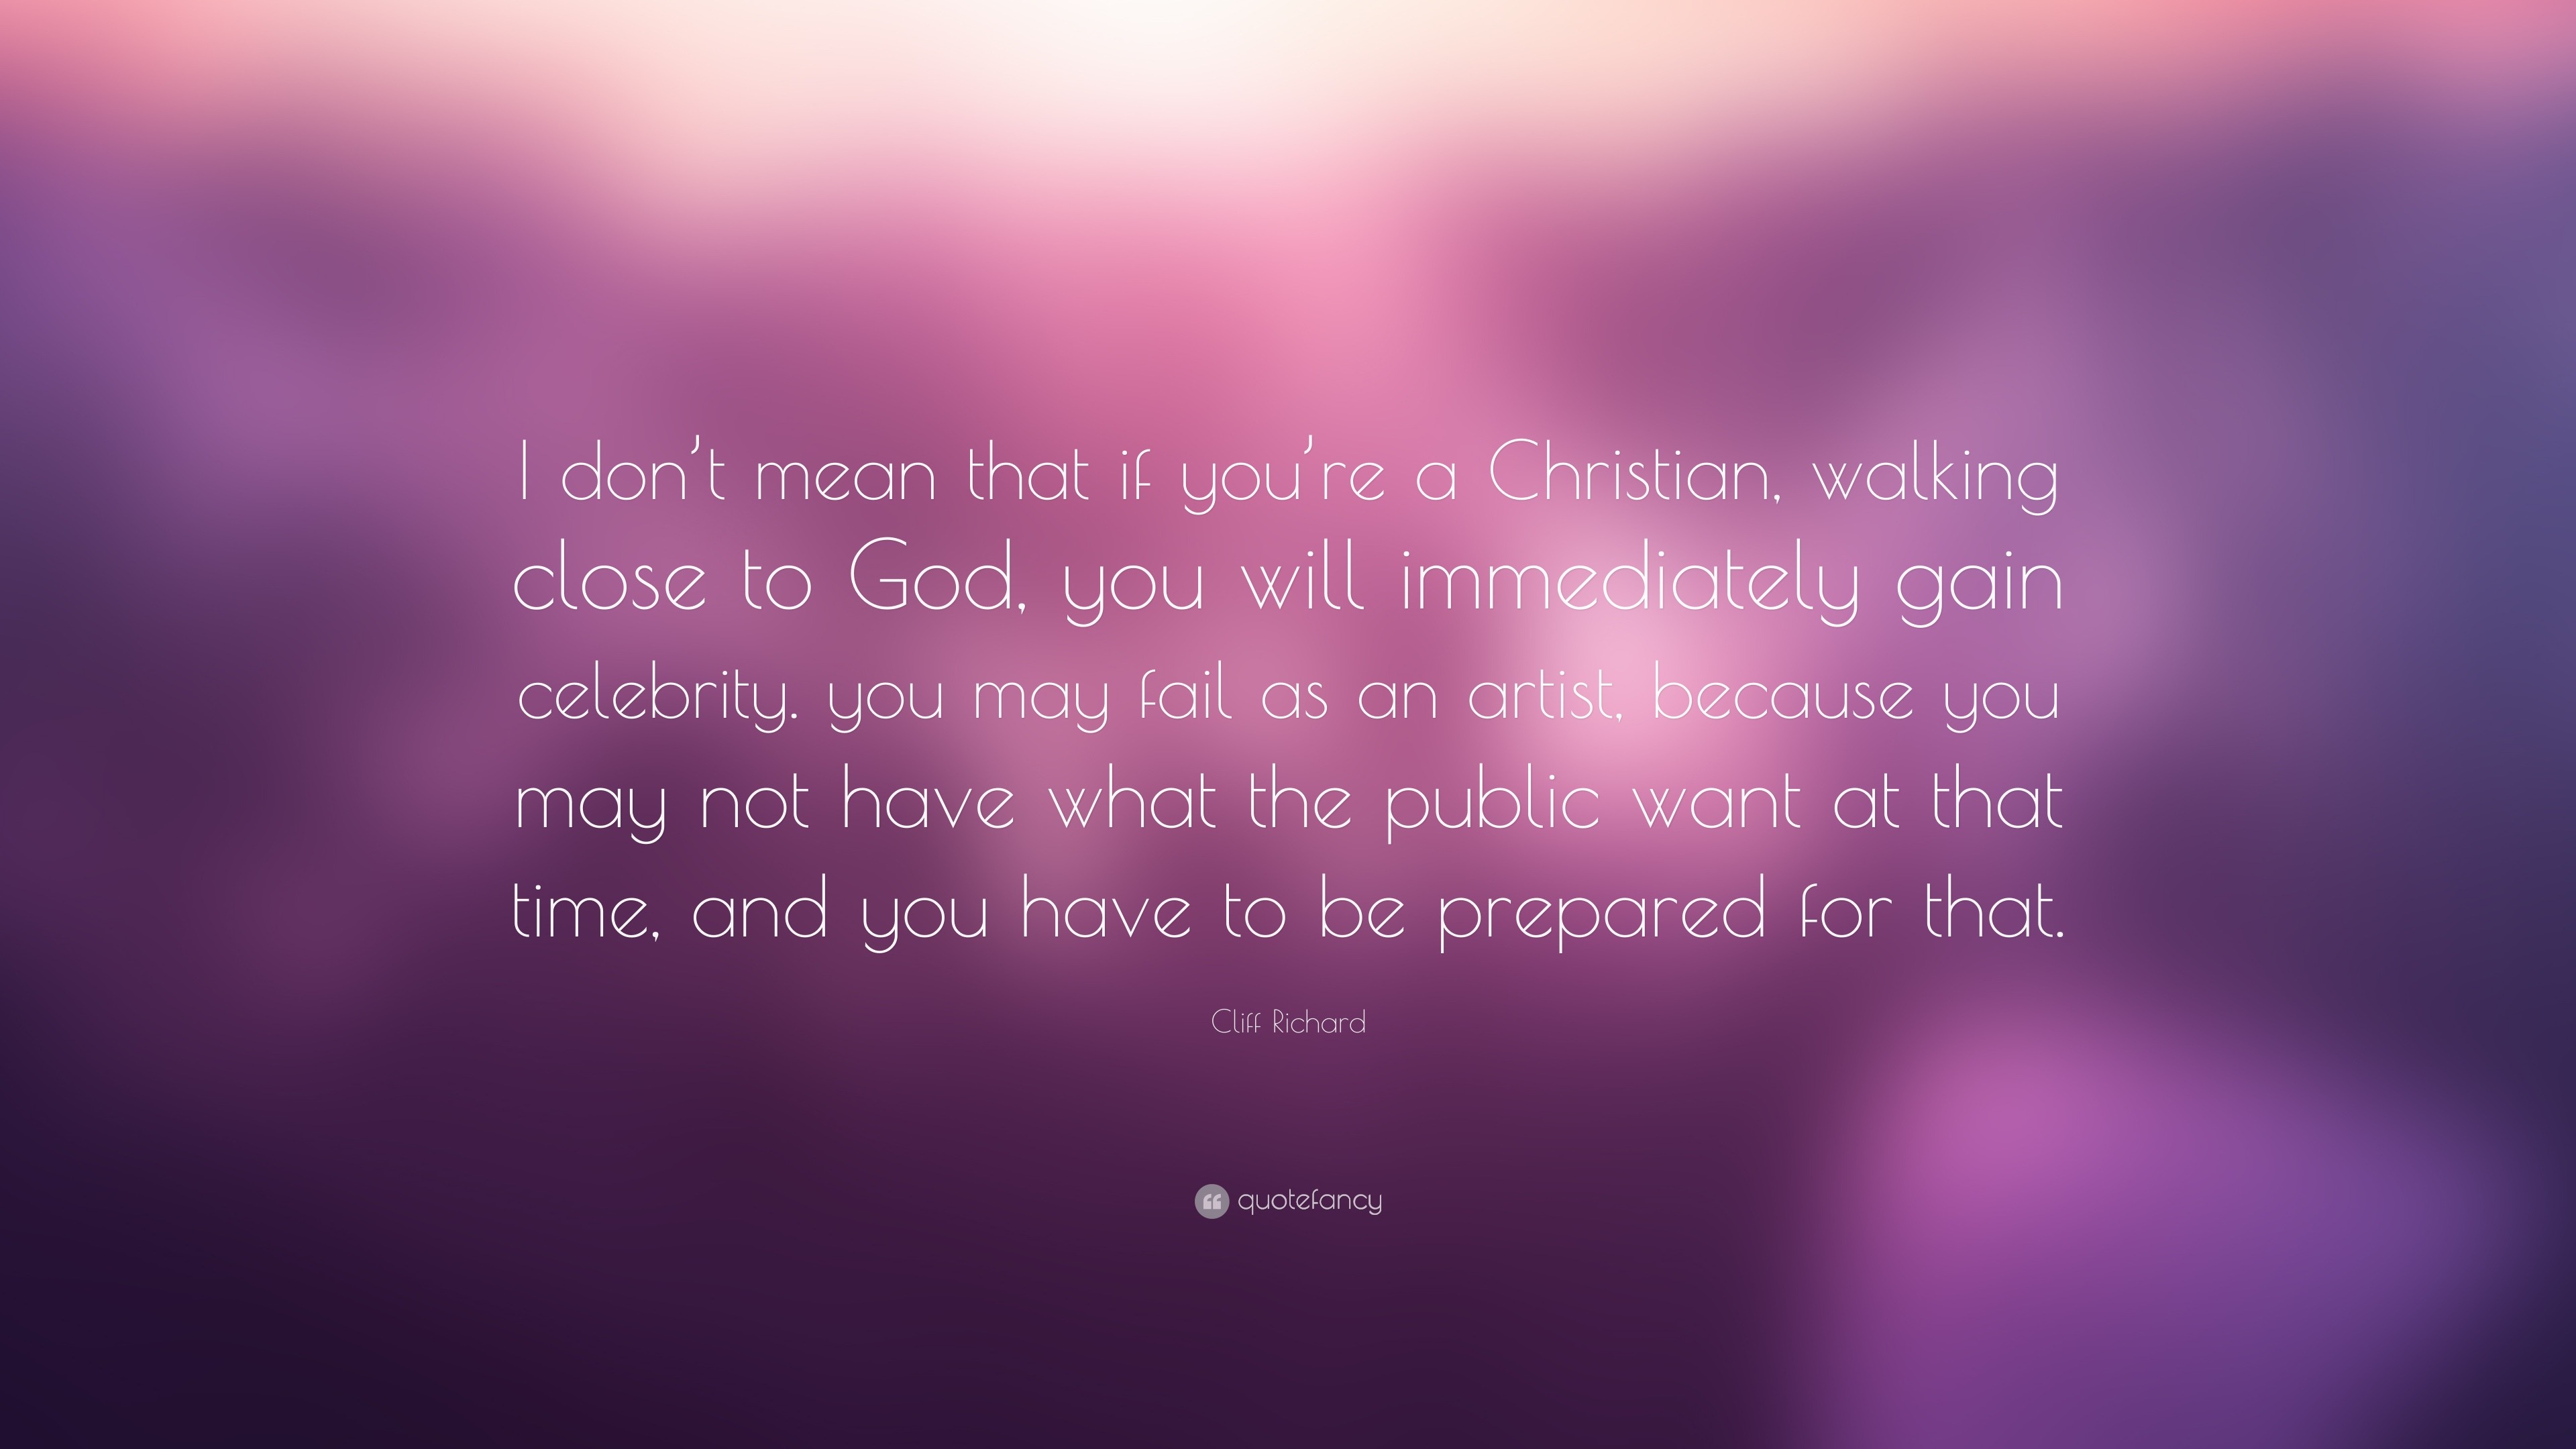 Cliff Richard Quote: “I don’t mean that if you’re a Christian, walking ...